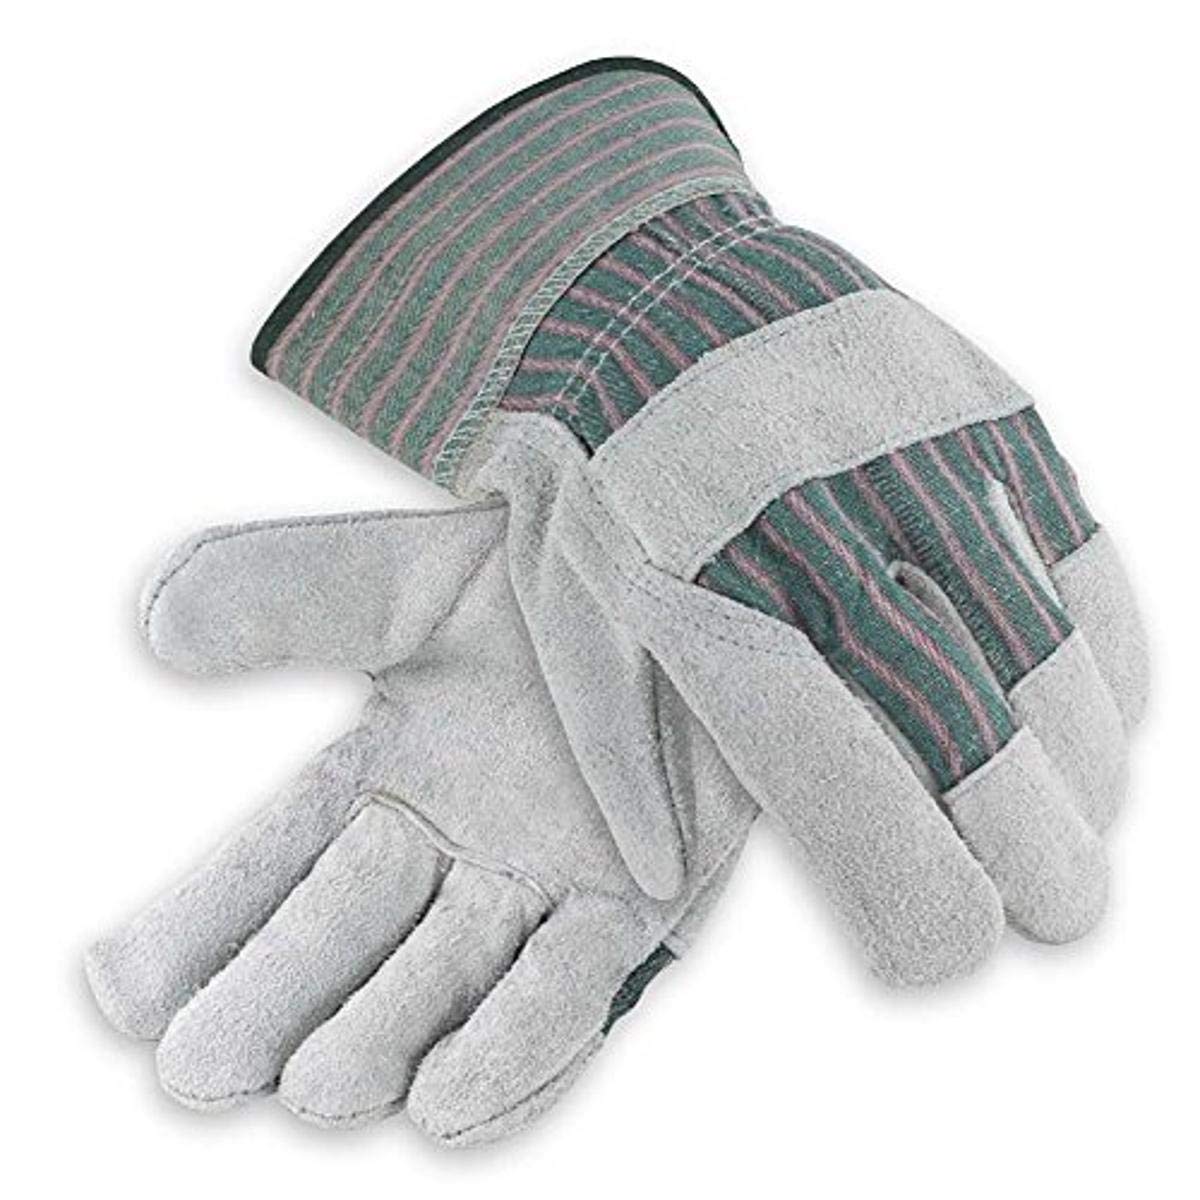 Galeton Heavy Shoulder Leather Palm Gloves Safety Cuff Green Stripe 12 Pack 2114, 2x-large